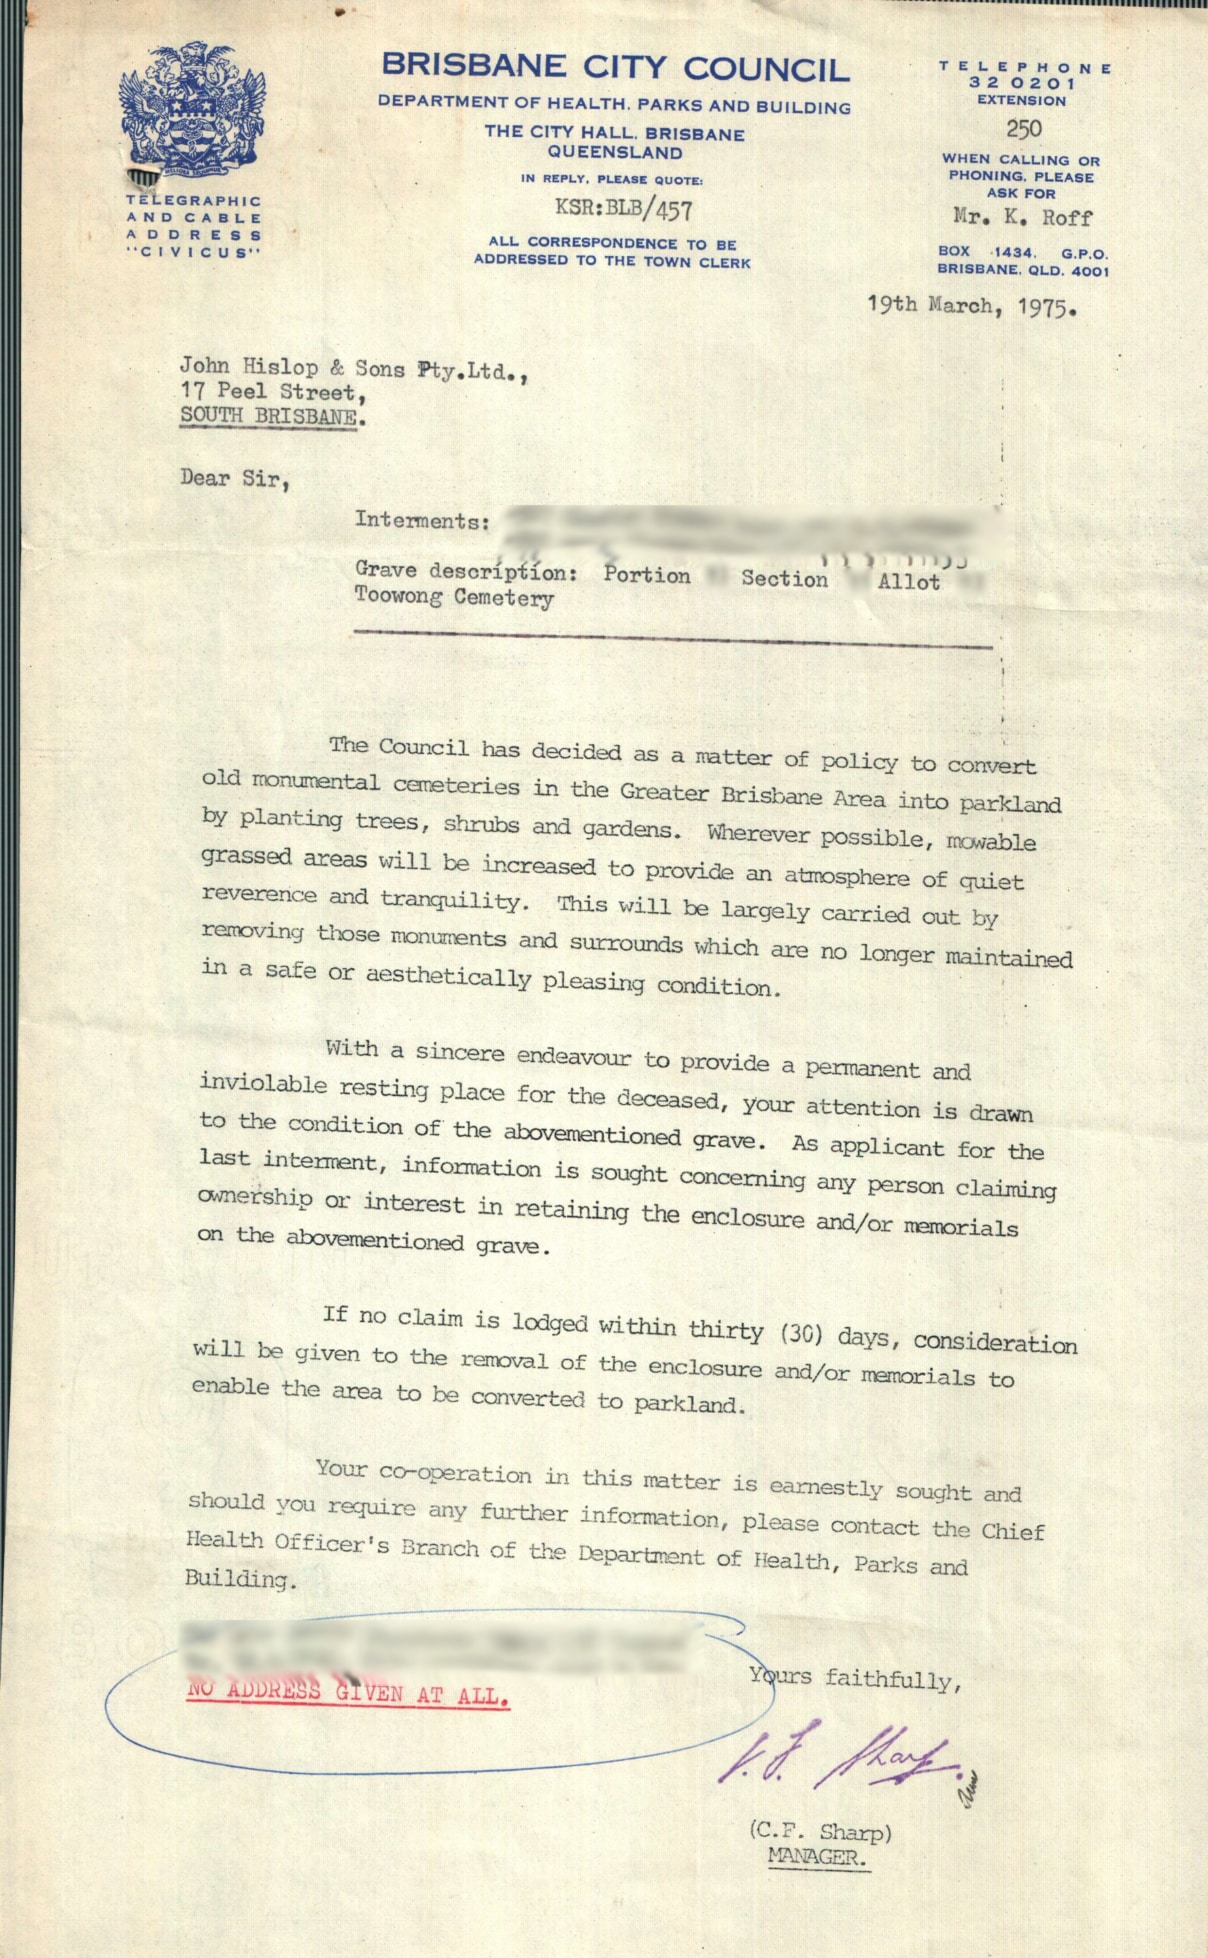 Letter about removing headstones from Toowong Cemetery, 1975